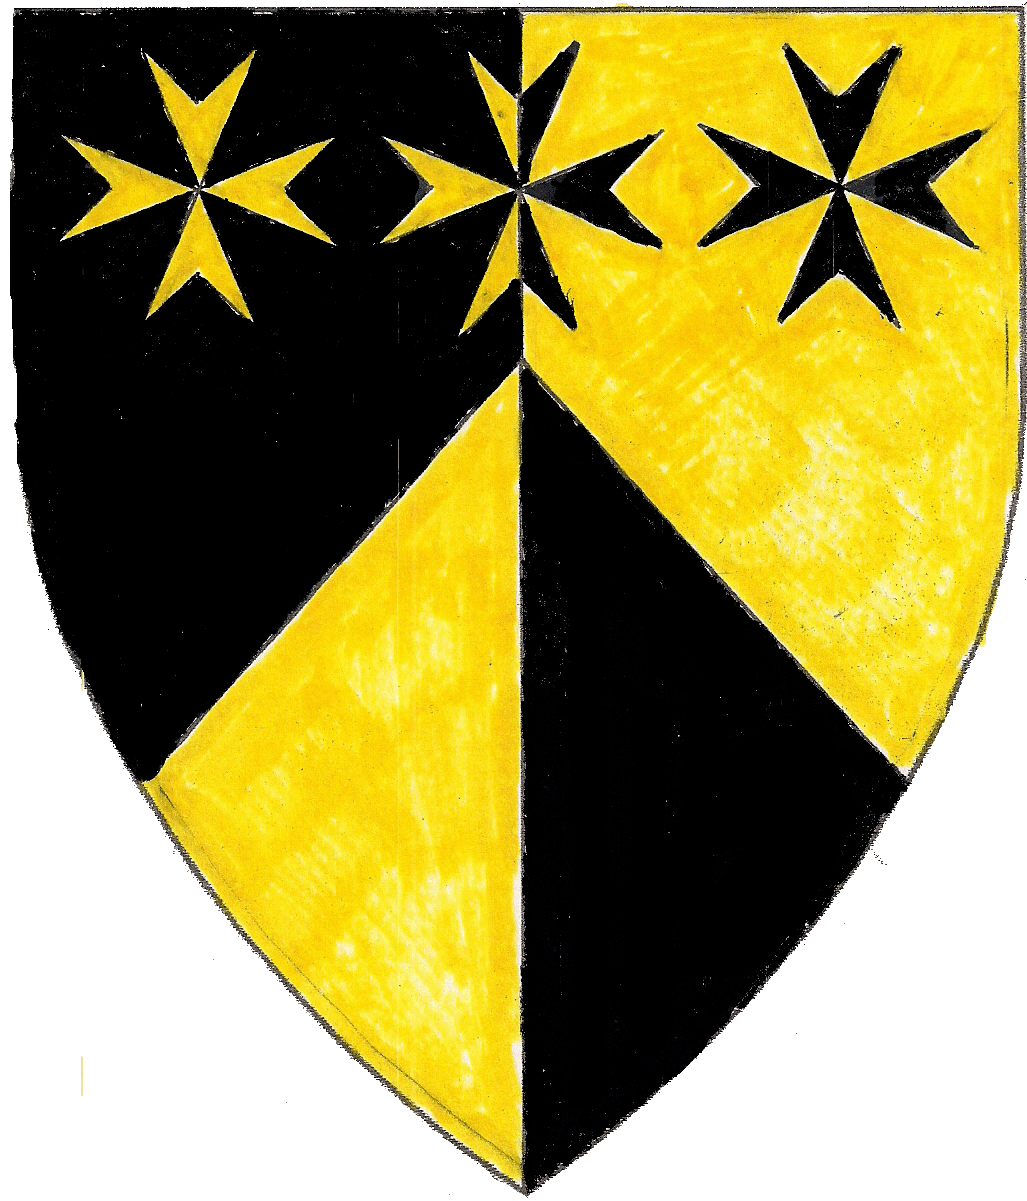 The arms of Mat O Deane the Incorrigible